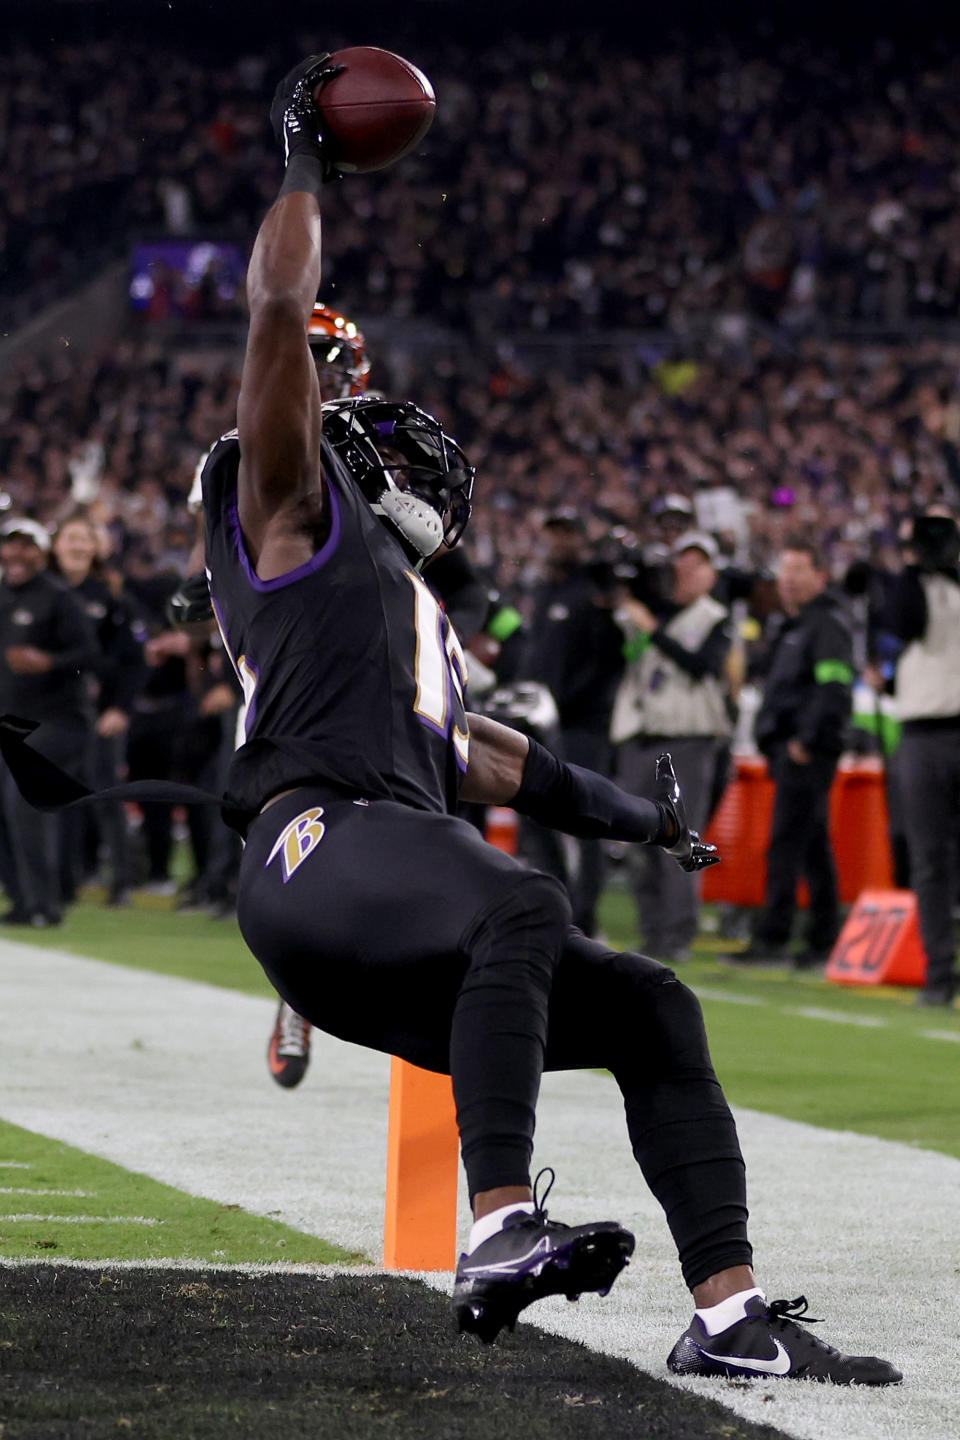 BALTIMORE, MARYLAND – NOVEMBER 16: Nelson Agholor #15 of the Baltimore Ravens does a flip in celebration after scoring a touchdown against the Cincinnati Bengals during the second quarter of the game at M&T Bank Stadium on November 16, 2023 in Baltimore, Maryland. (Photo by Patrick Smith/Getty Images)